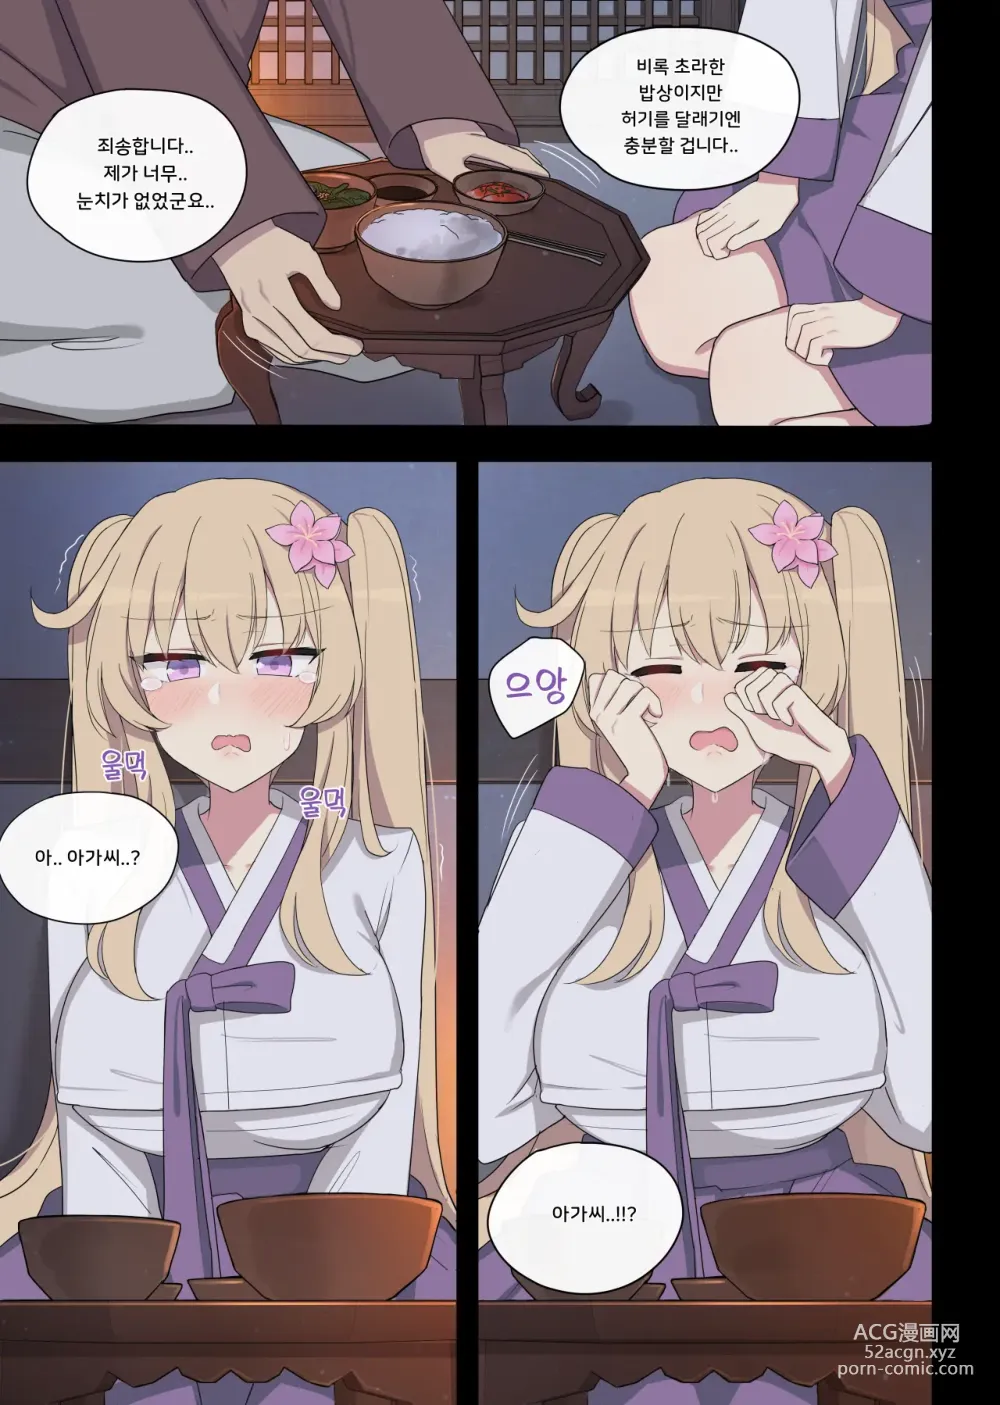 Page 8 of doujinshi The swallow that repaid a favor 1-2 (decensored)